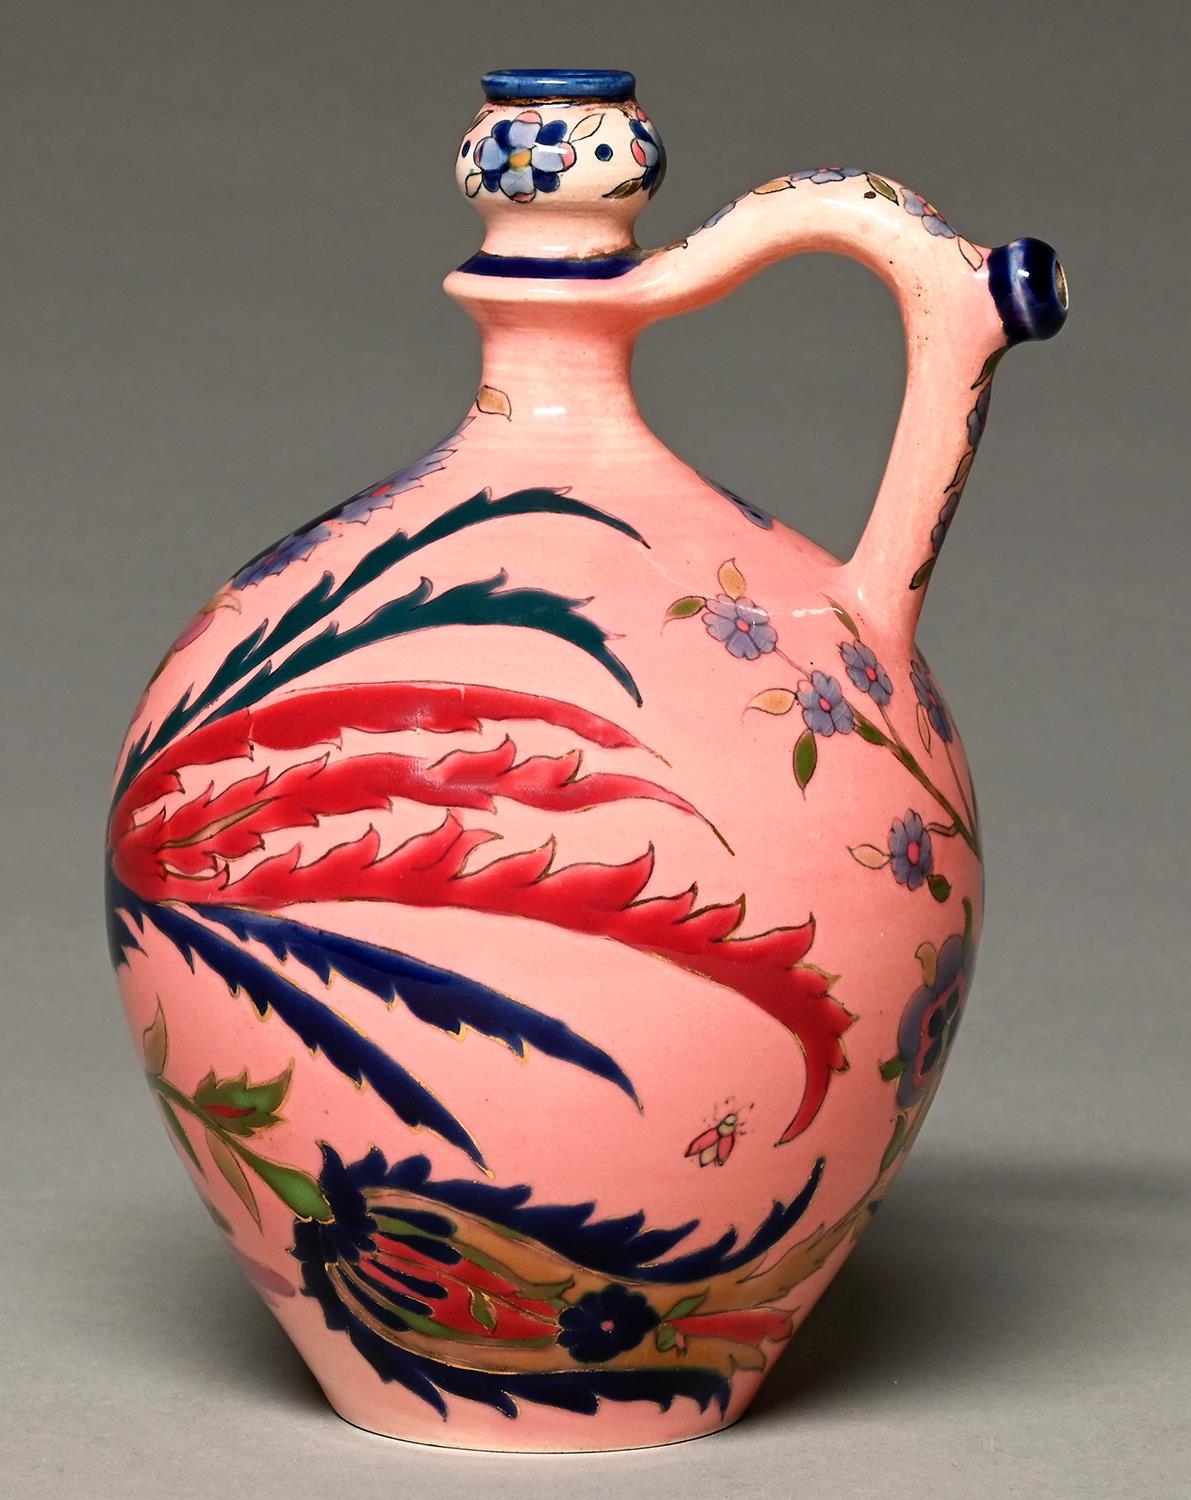 A Zsolnay ewer, c1880, decorated in the Magyar-Turkish style with a long tailed bird, tulips and - Bild 2 aus 3